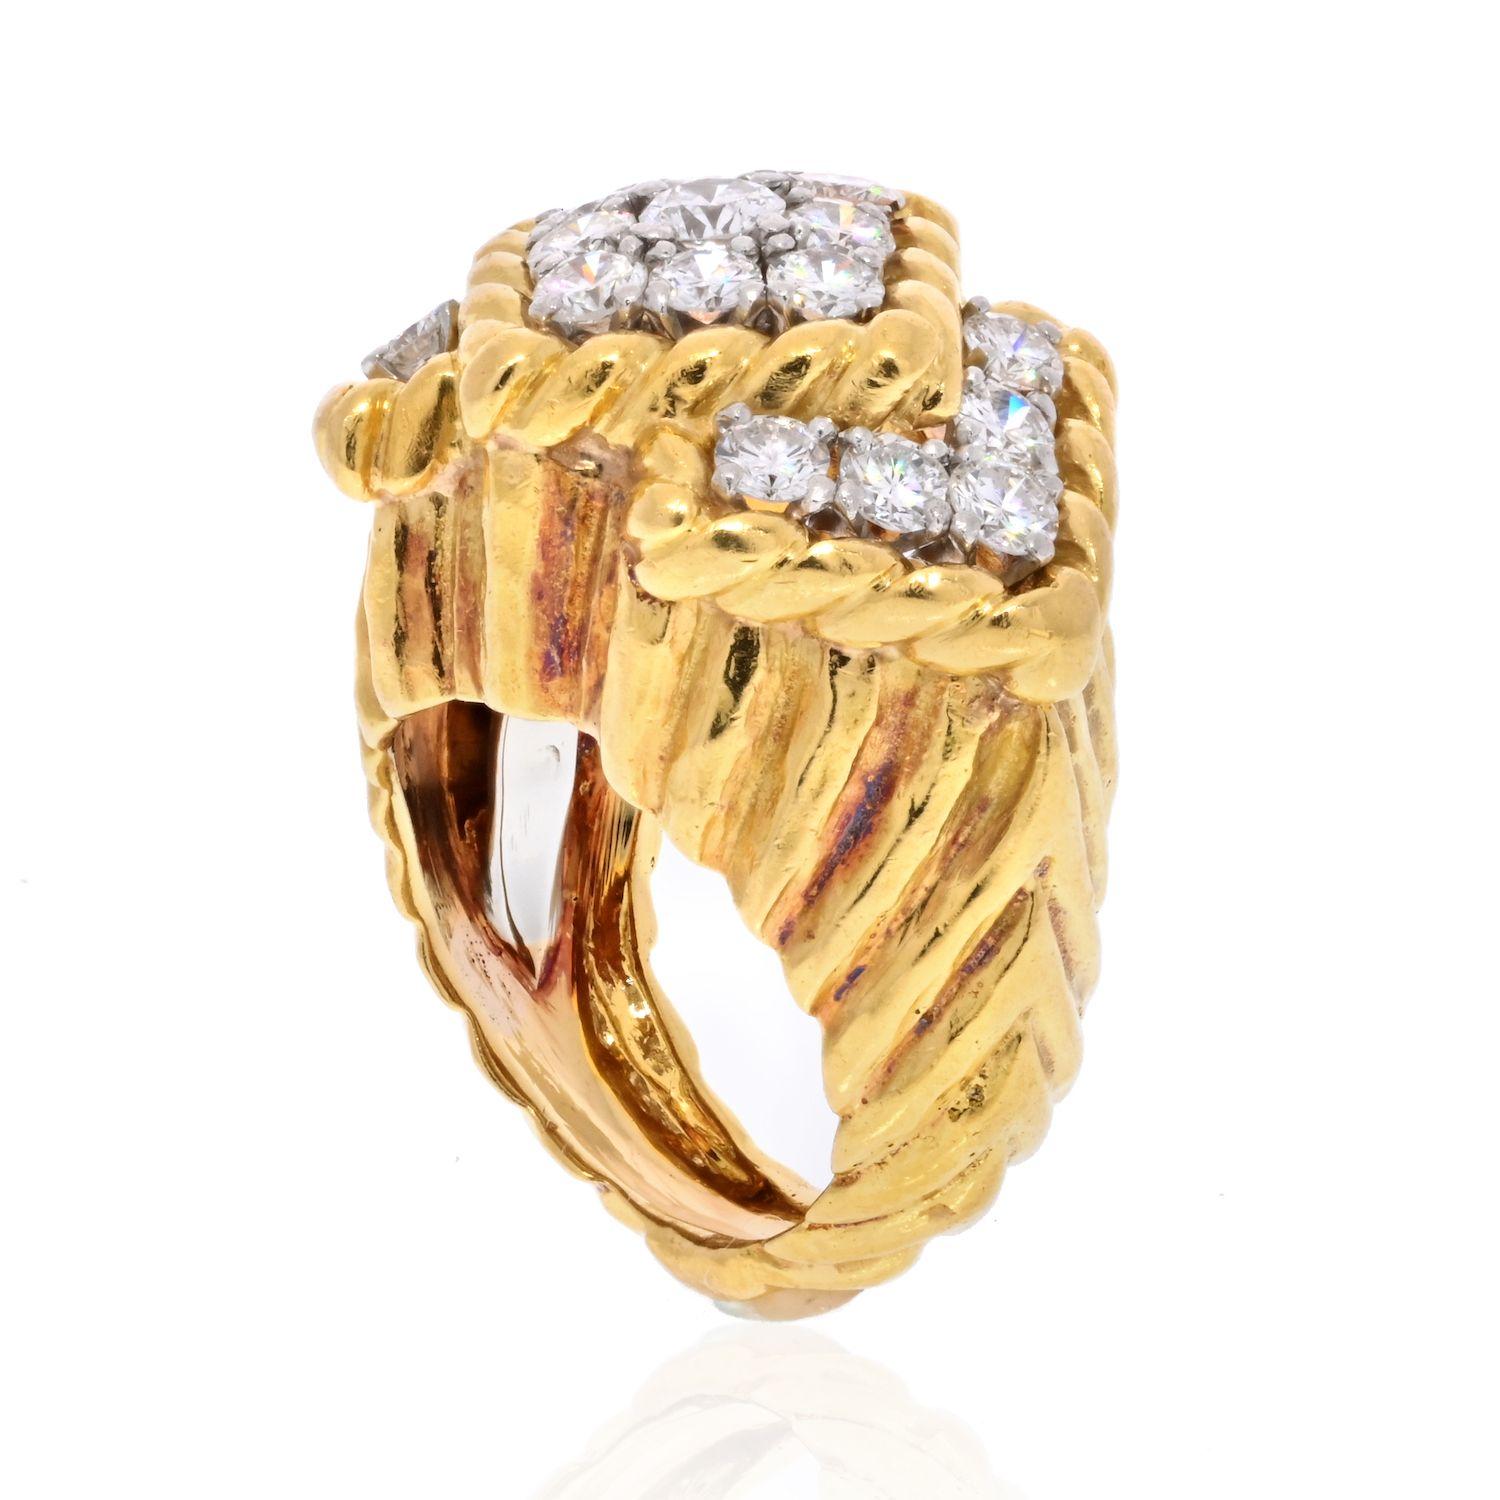 Designed as an interlocking rhombus frame this is a ring designed by David Webb mounted with round diamonds in platinum. Familiar chevron style ring crafted will become your favorite in you jewelry box the moment you put it on, comfortable and